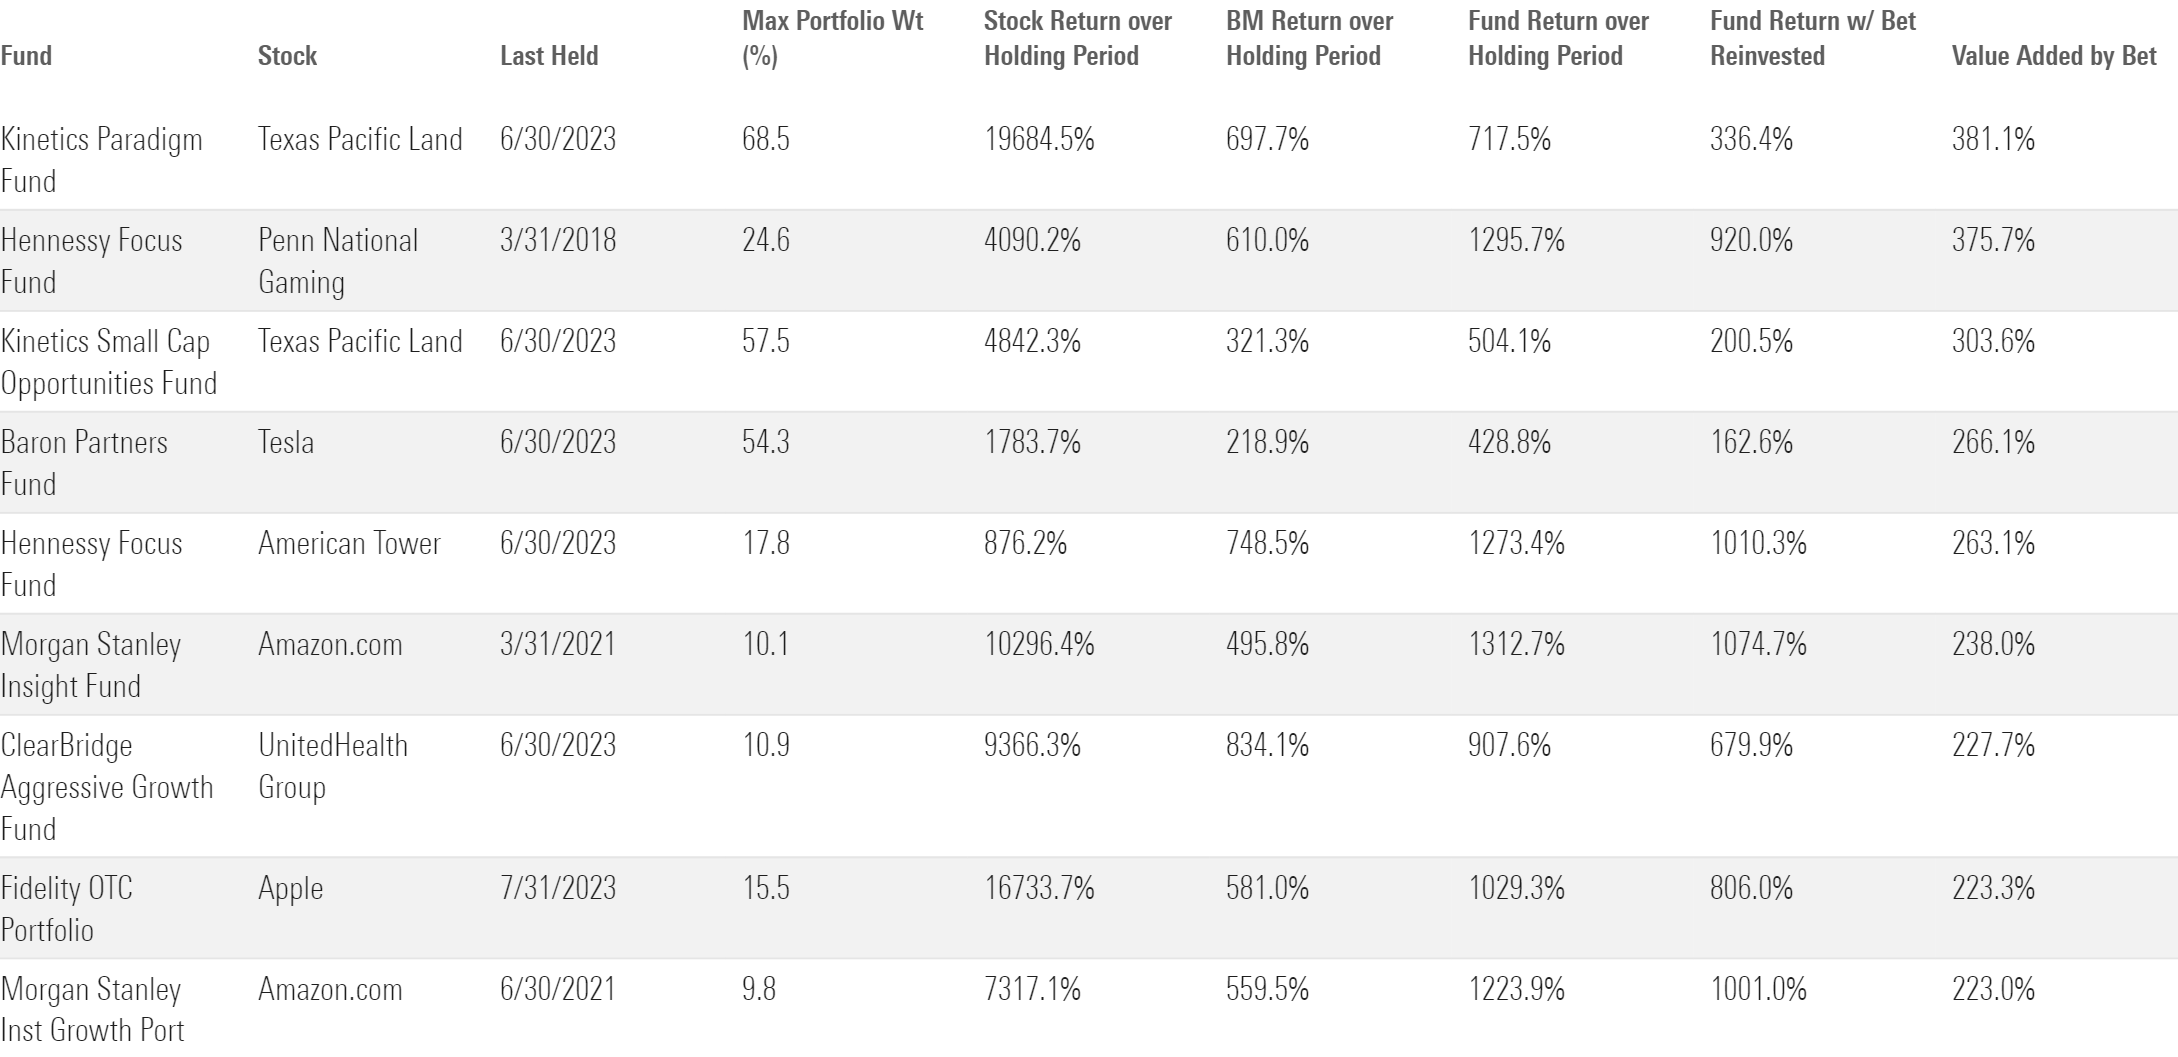 A table of the best mutual fund bets since 1997 by value added.